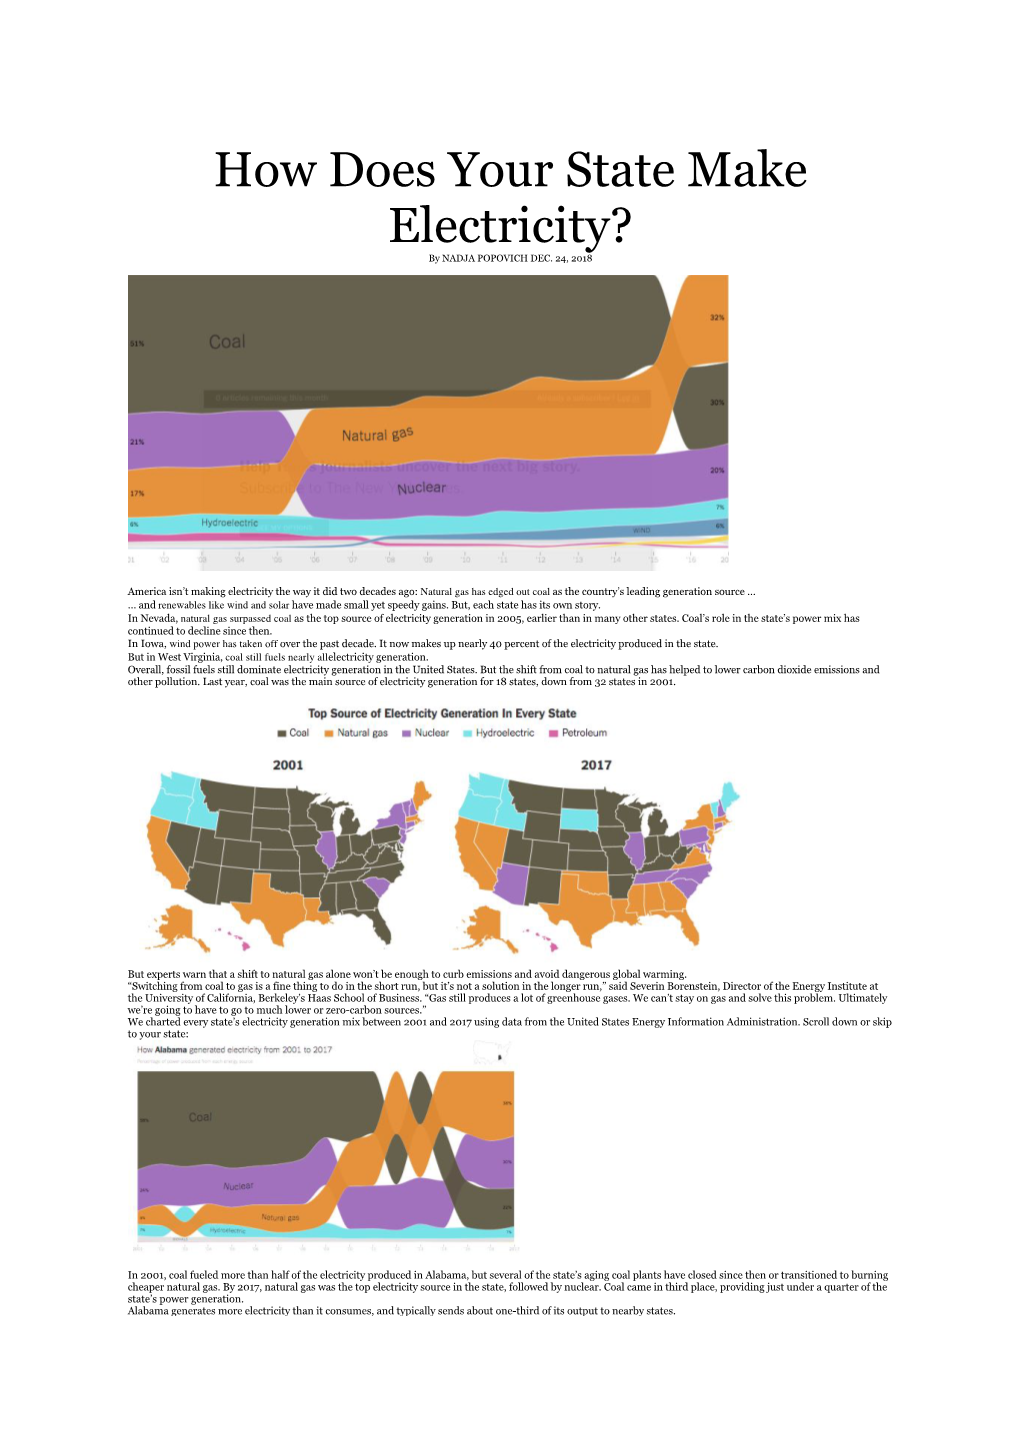 How Does Your State Make Electricity? by NADJA POPOVICH DEC